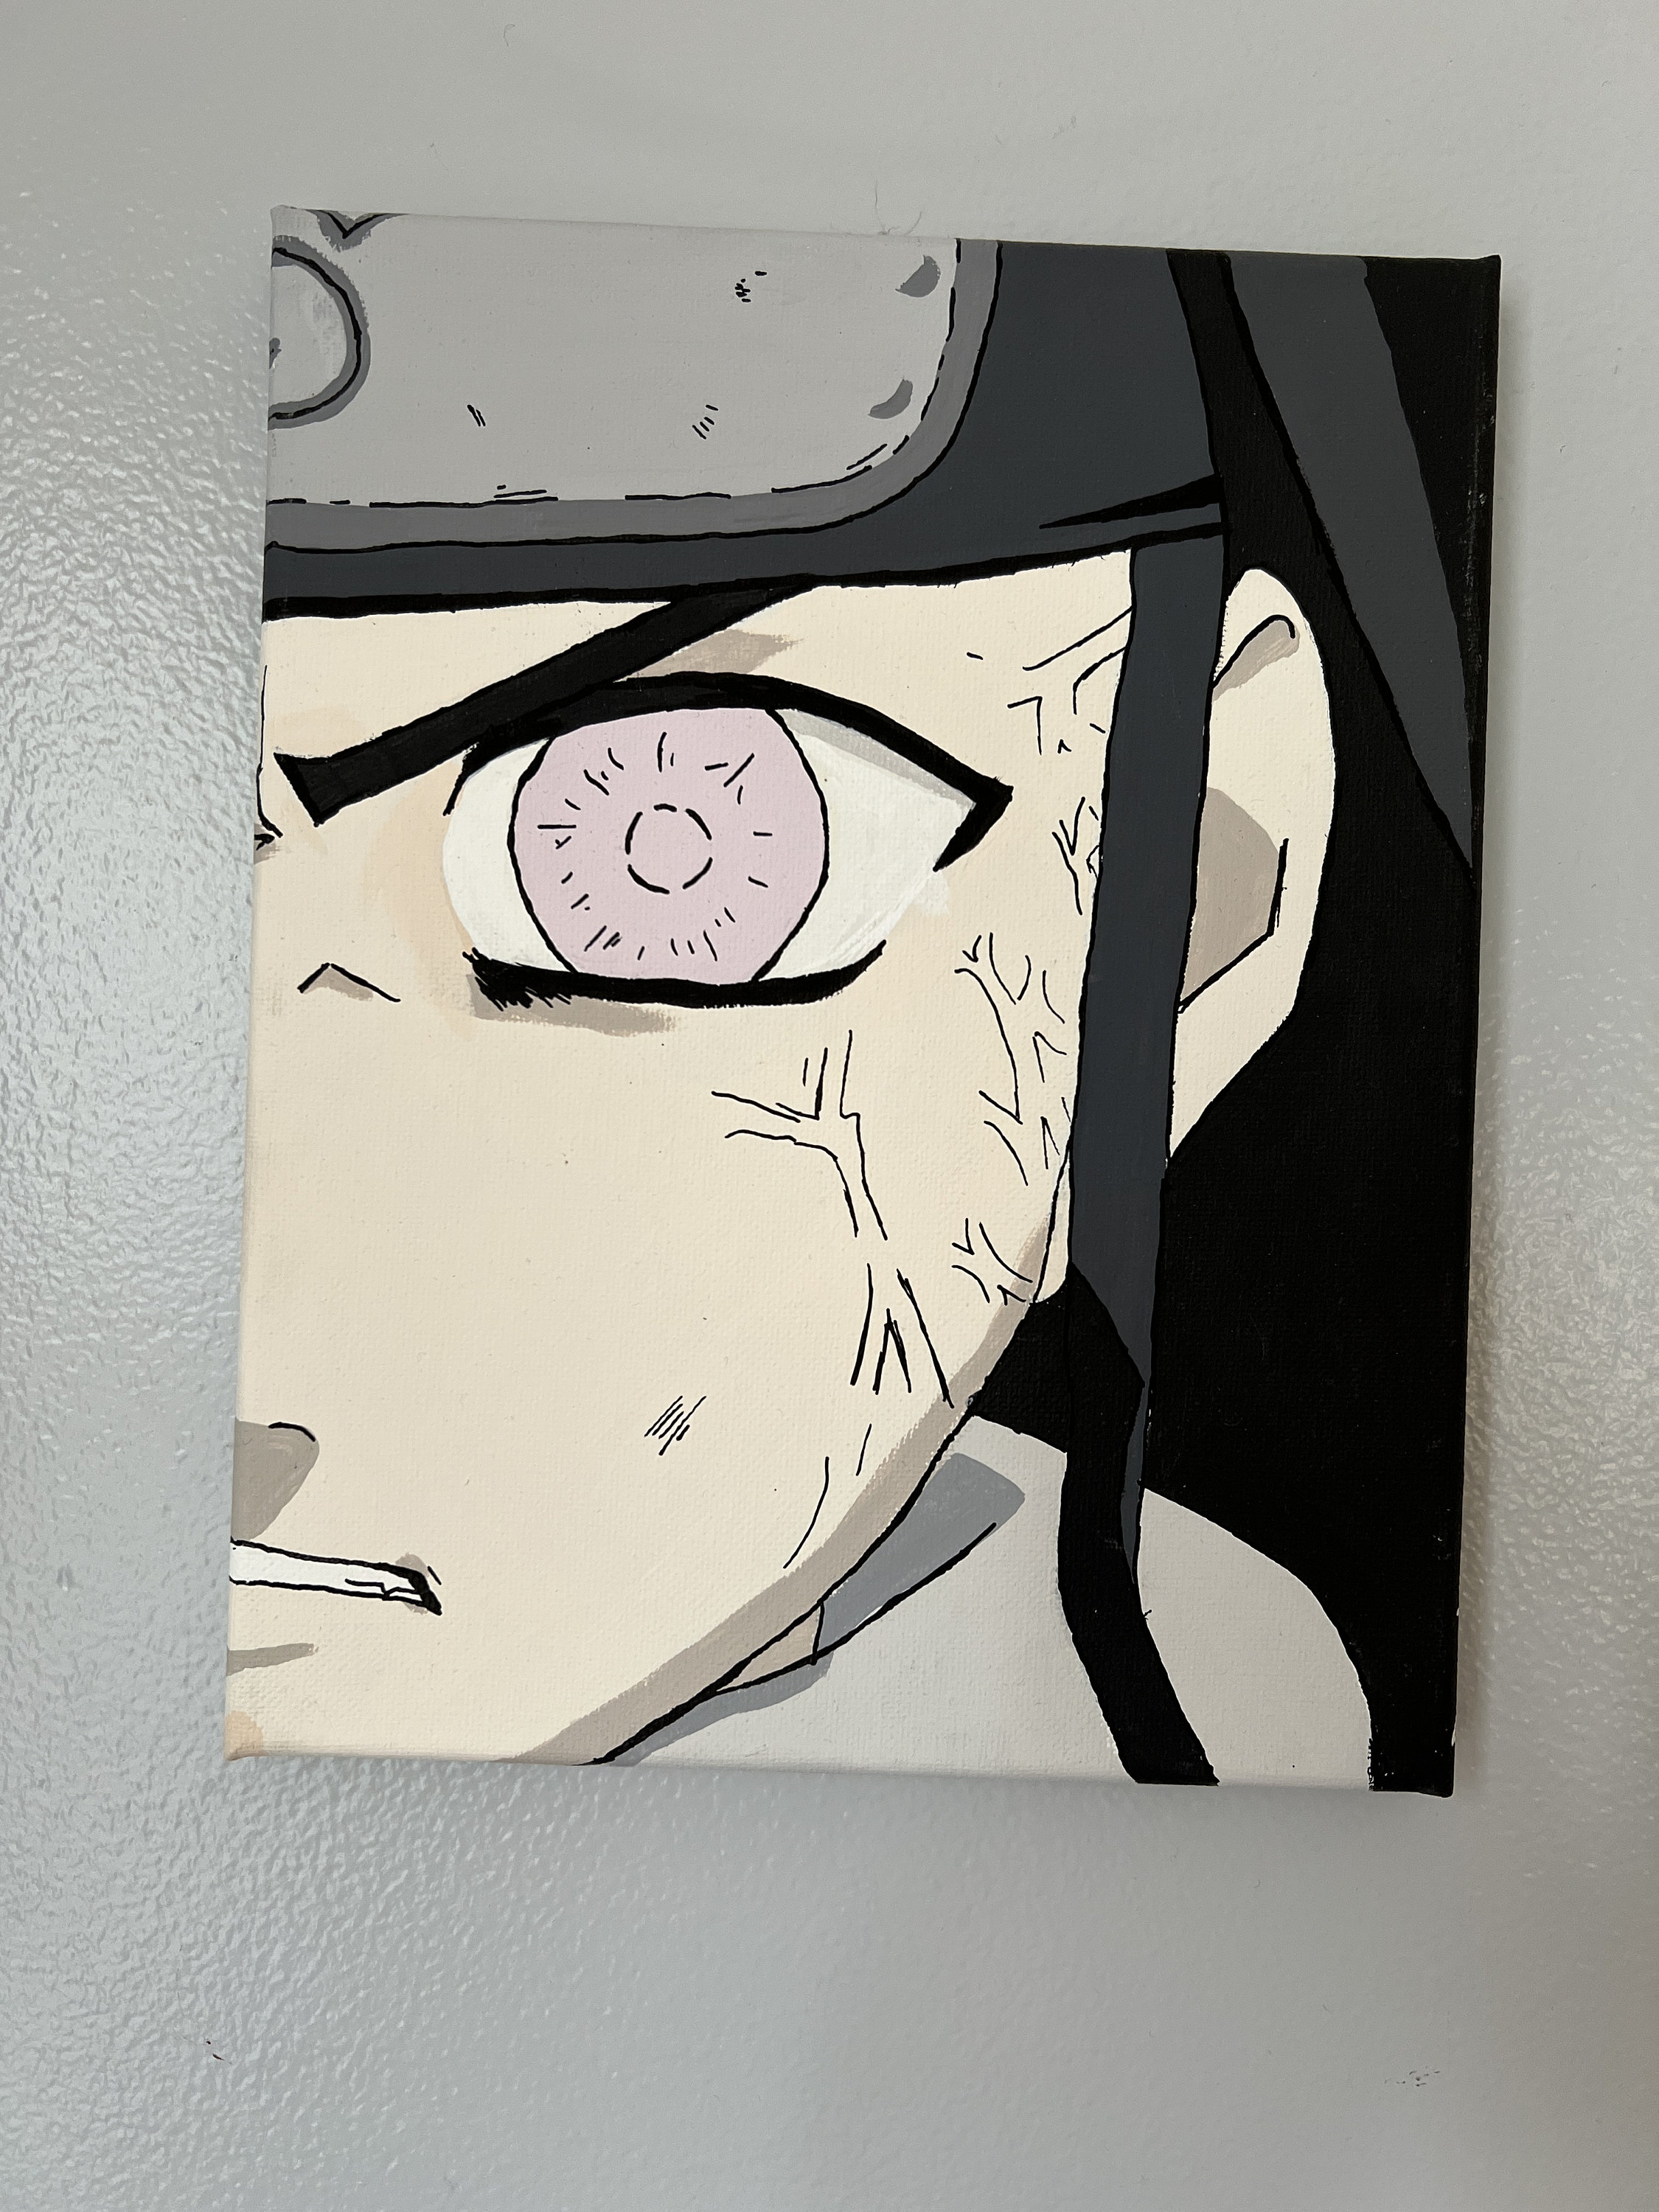 Paints of Rvt Naruto (New paint naruto finished) - Paint Designs